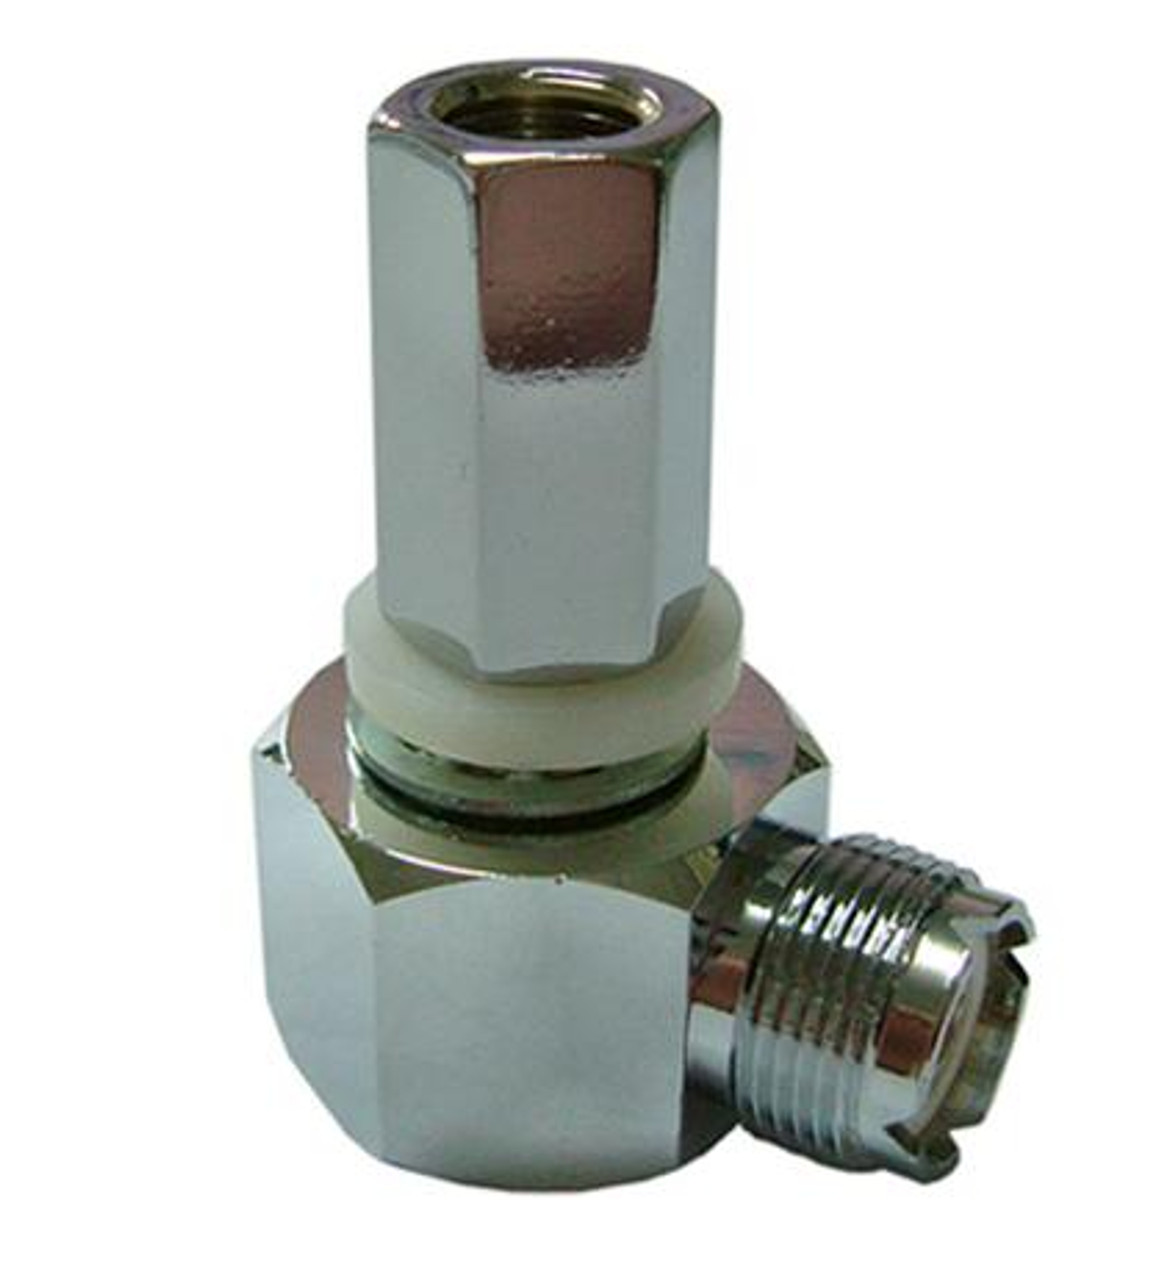 SM-1L - Right Angle Antenna Adapter - SO-239 to 3/8" x 24 Thread